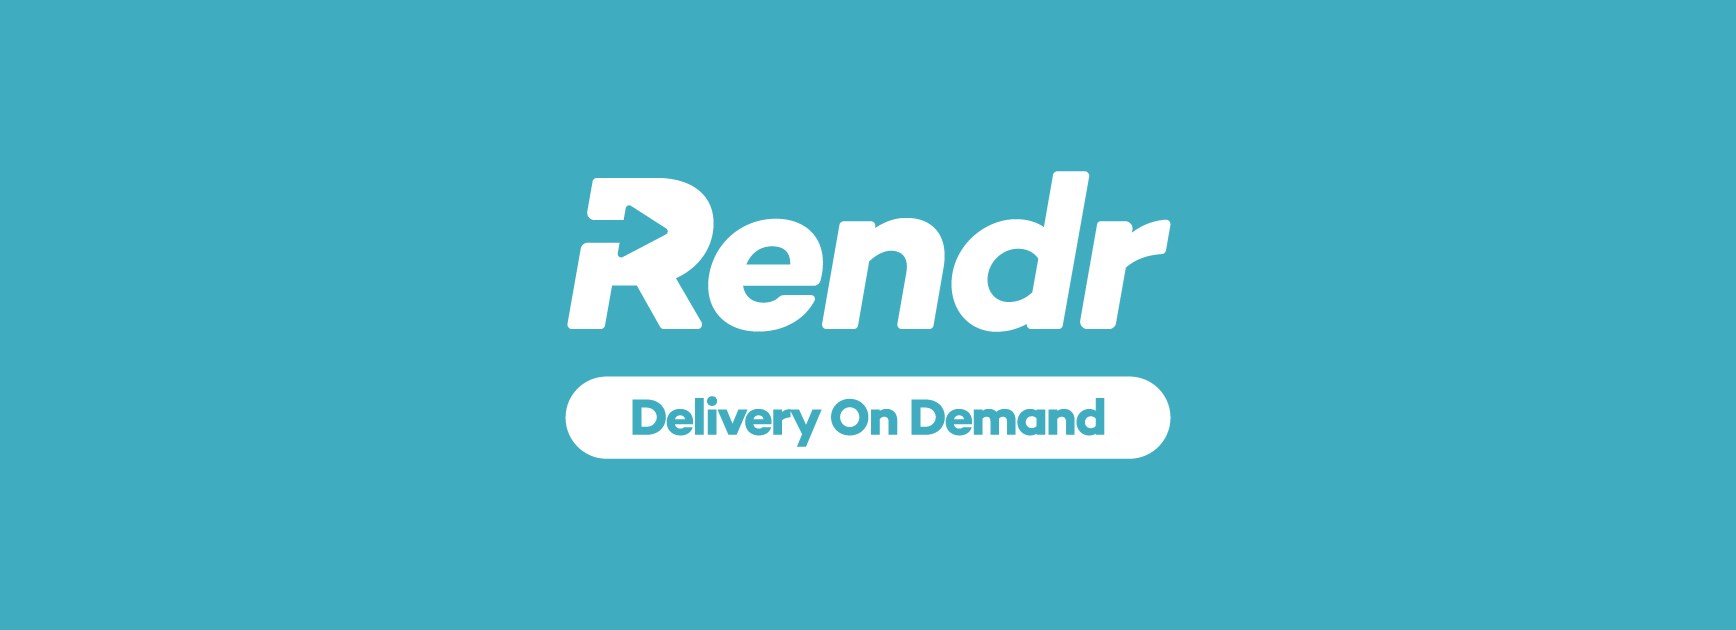 Rendr delivers new partnership to Manly